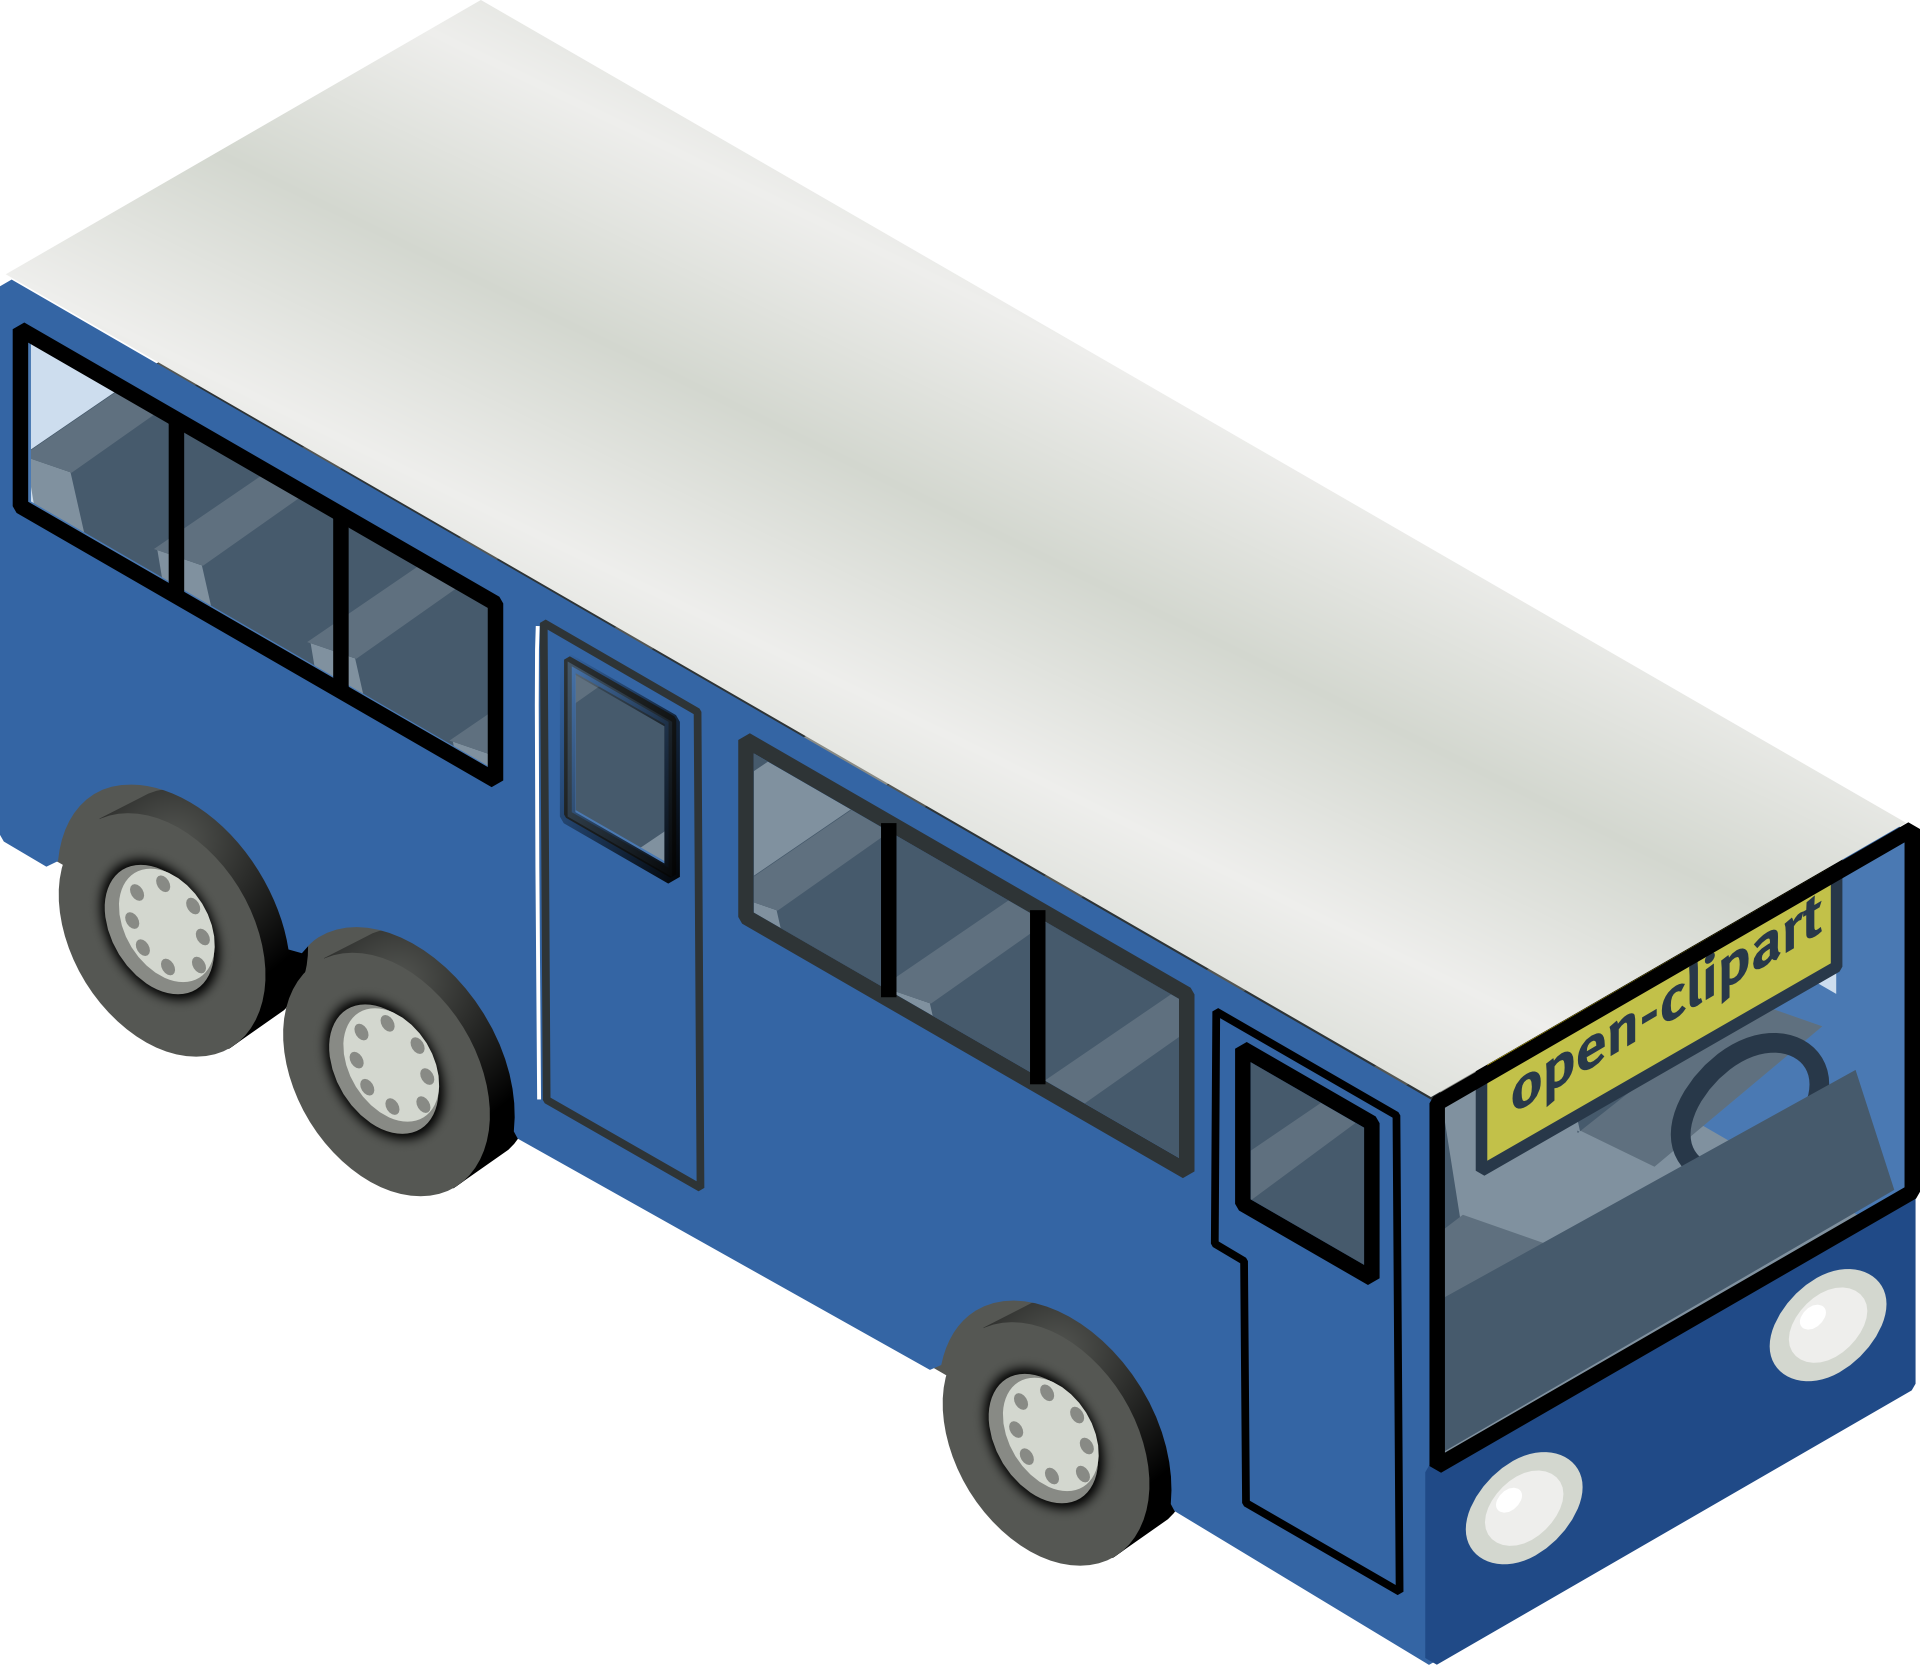 Blue Bus Top View Illustration Free Image Download